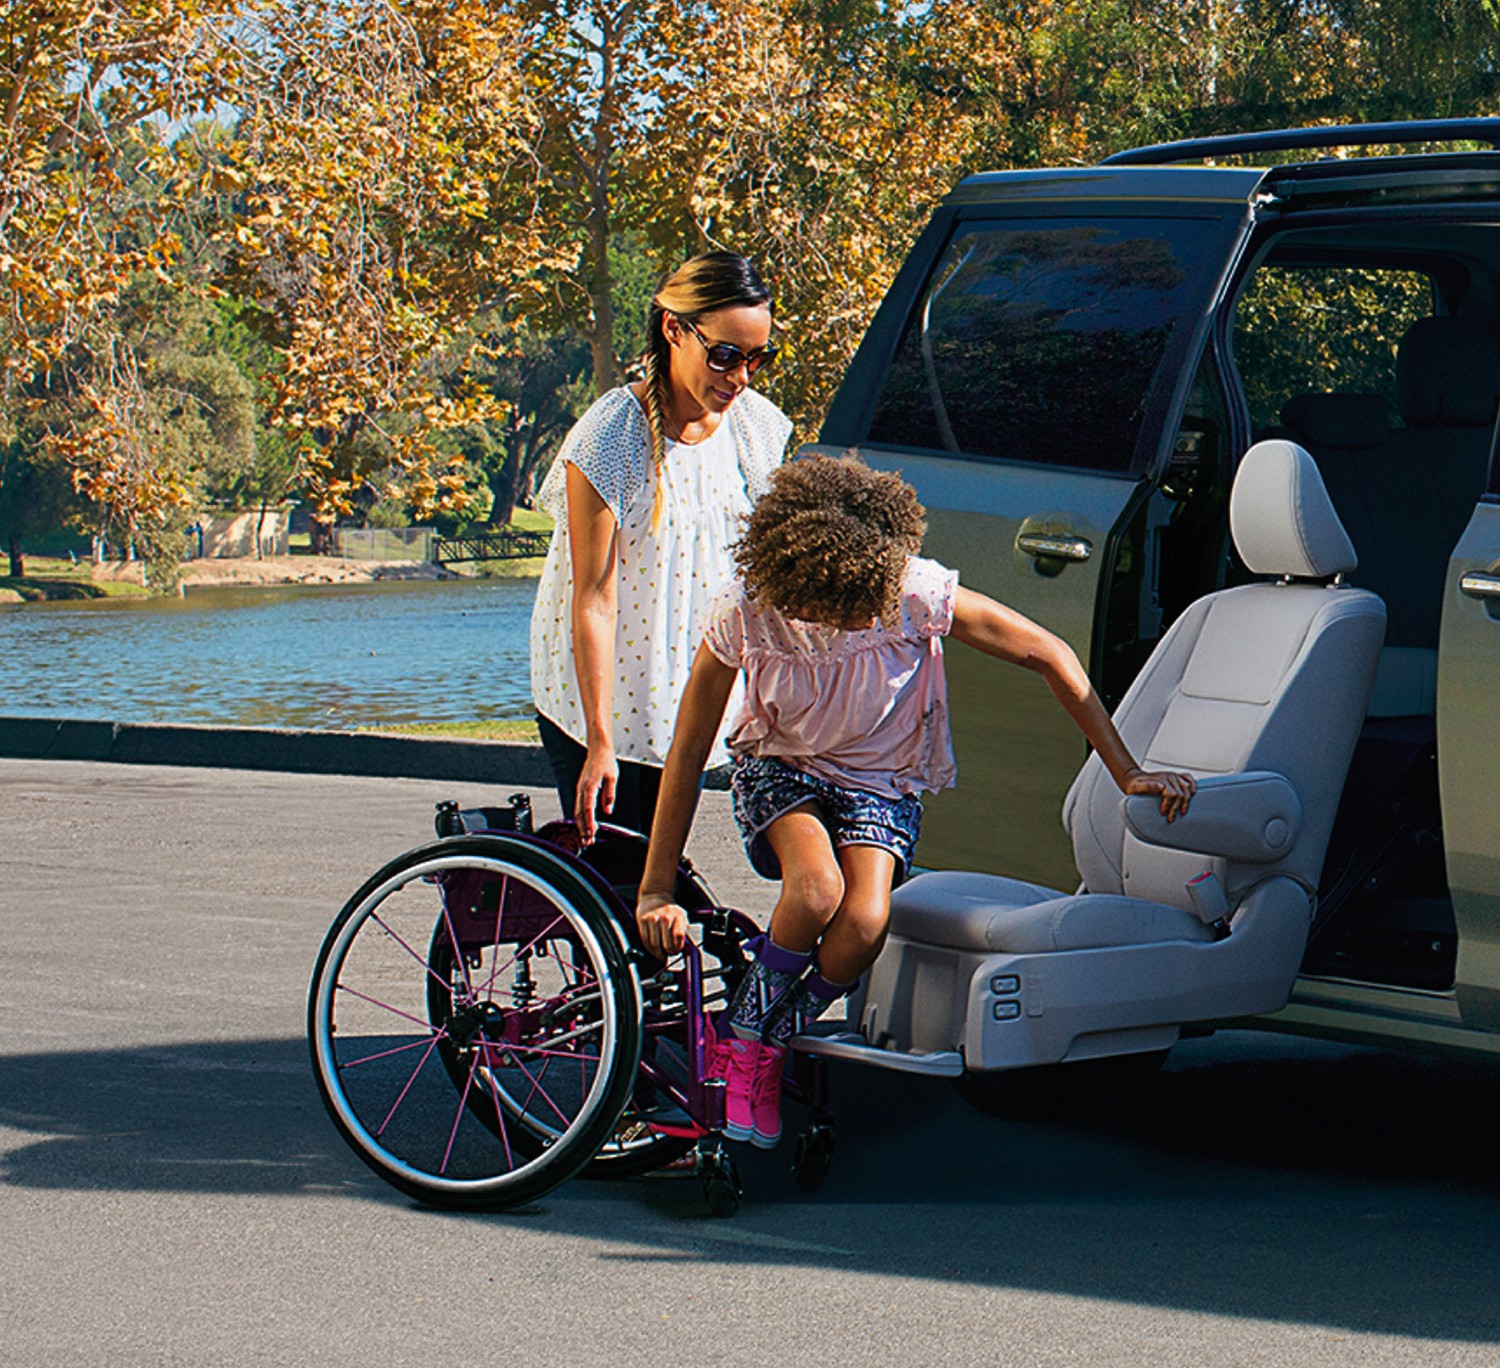 A mom assists her daughter as she gets out of a Toyota vehicle and into her wheelchair.